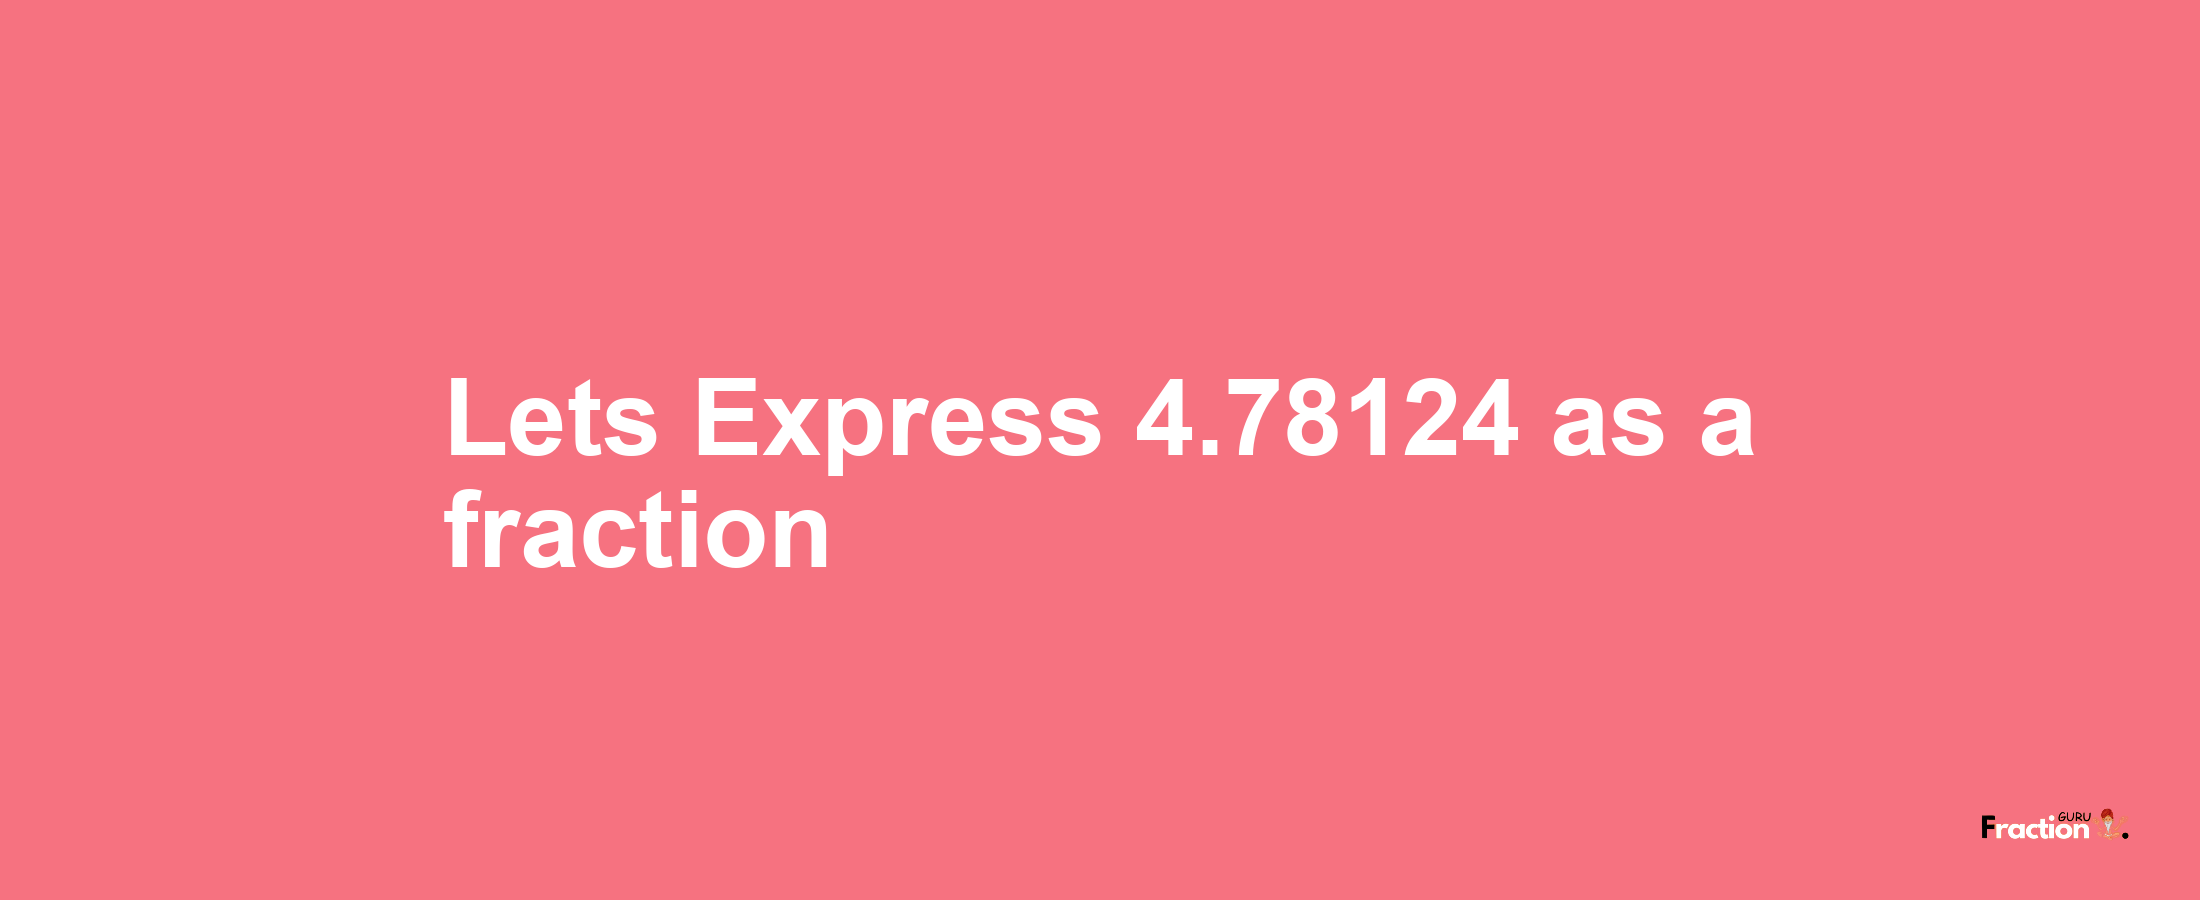 Lets Express 4.78124 as afraction